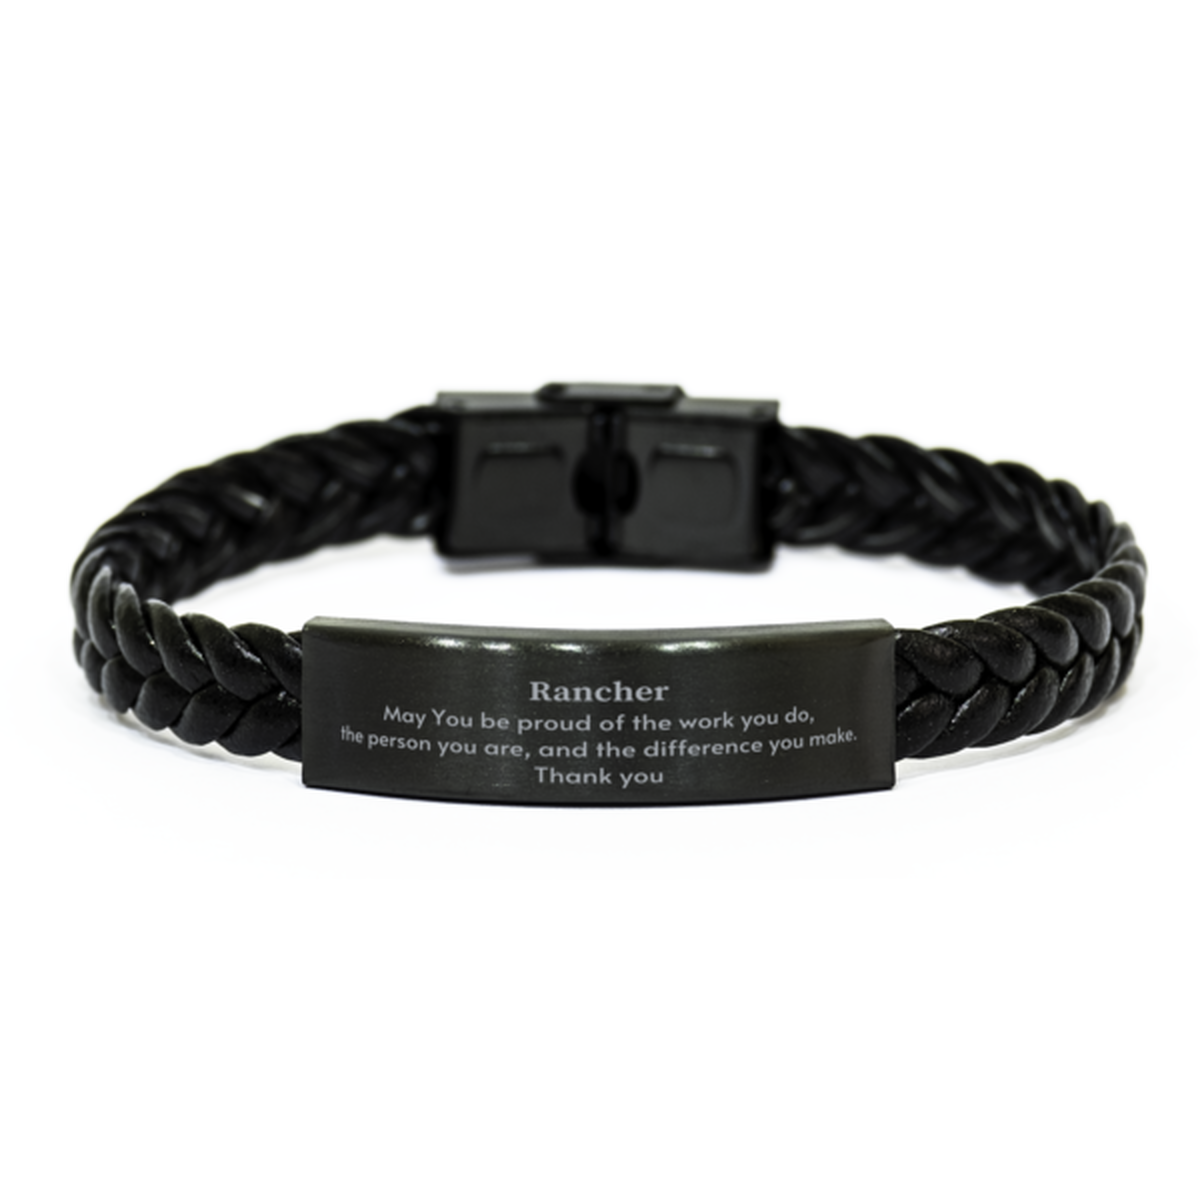 Heartwarming Braided Leather Bracelet Retirement Coworkers Gifts for Rancher, Rancher May You be proud of the work you do, the person you are Gifts for Boss Men Women Friends